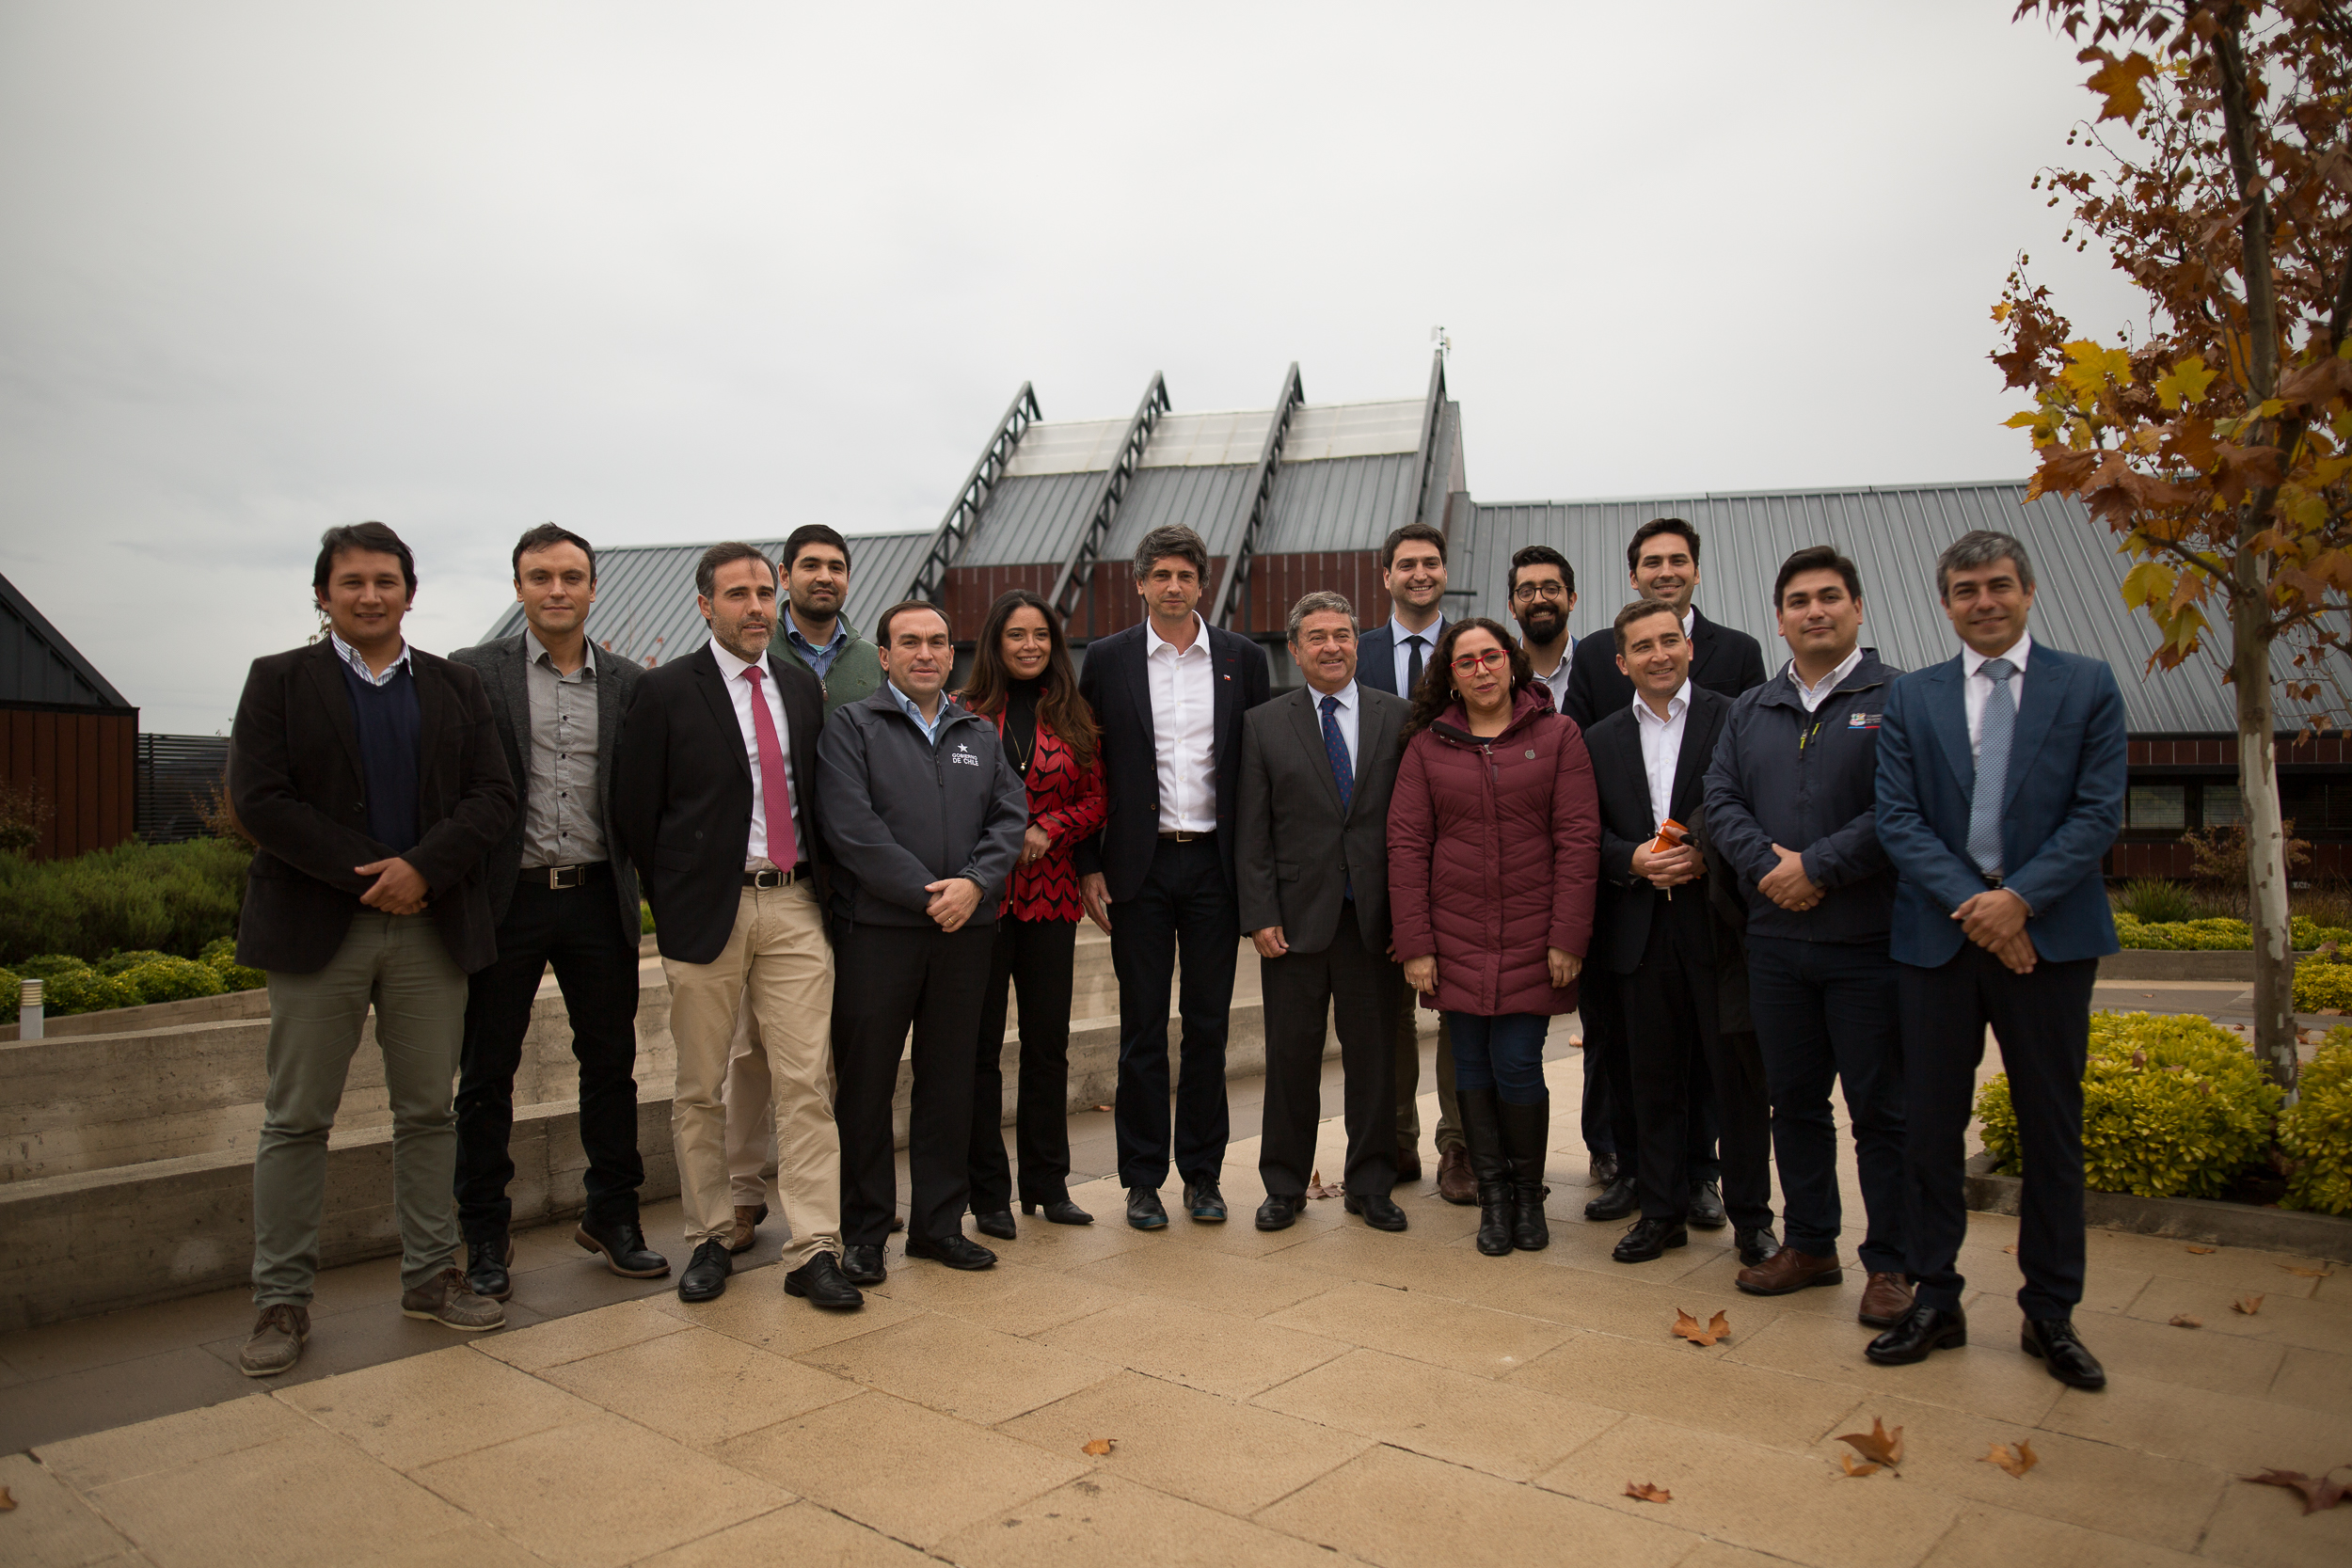 Minister of Science Visits Viña Concha y Toro’s Center for Research and Innovation